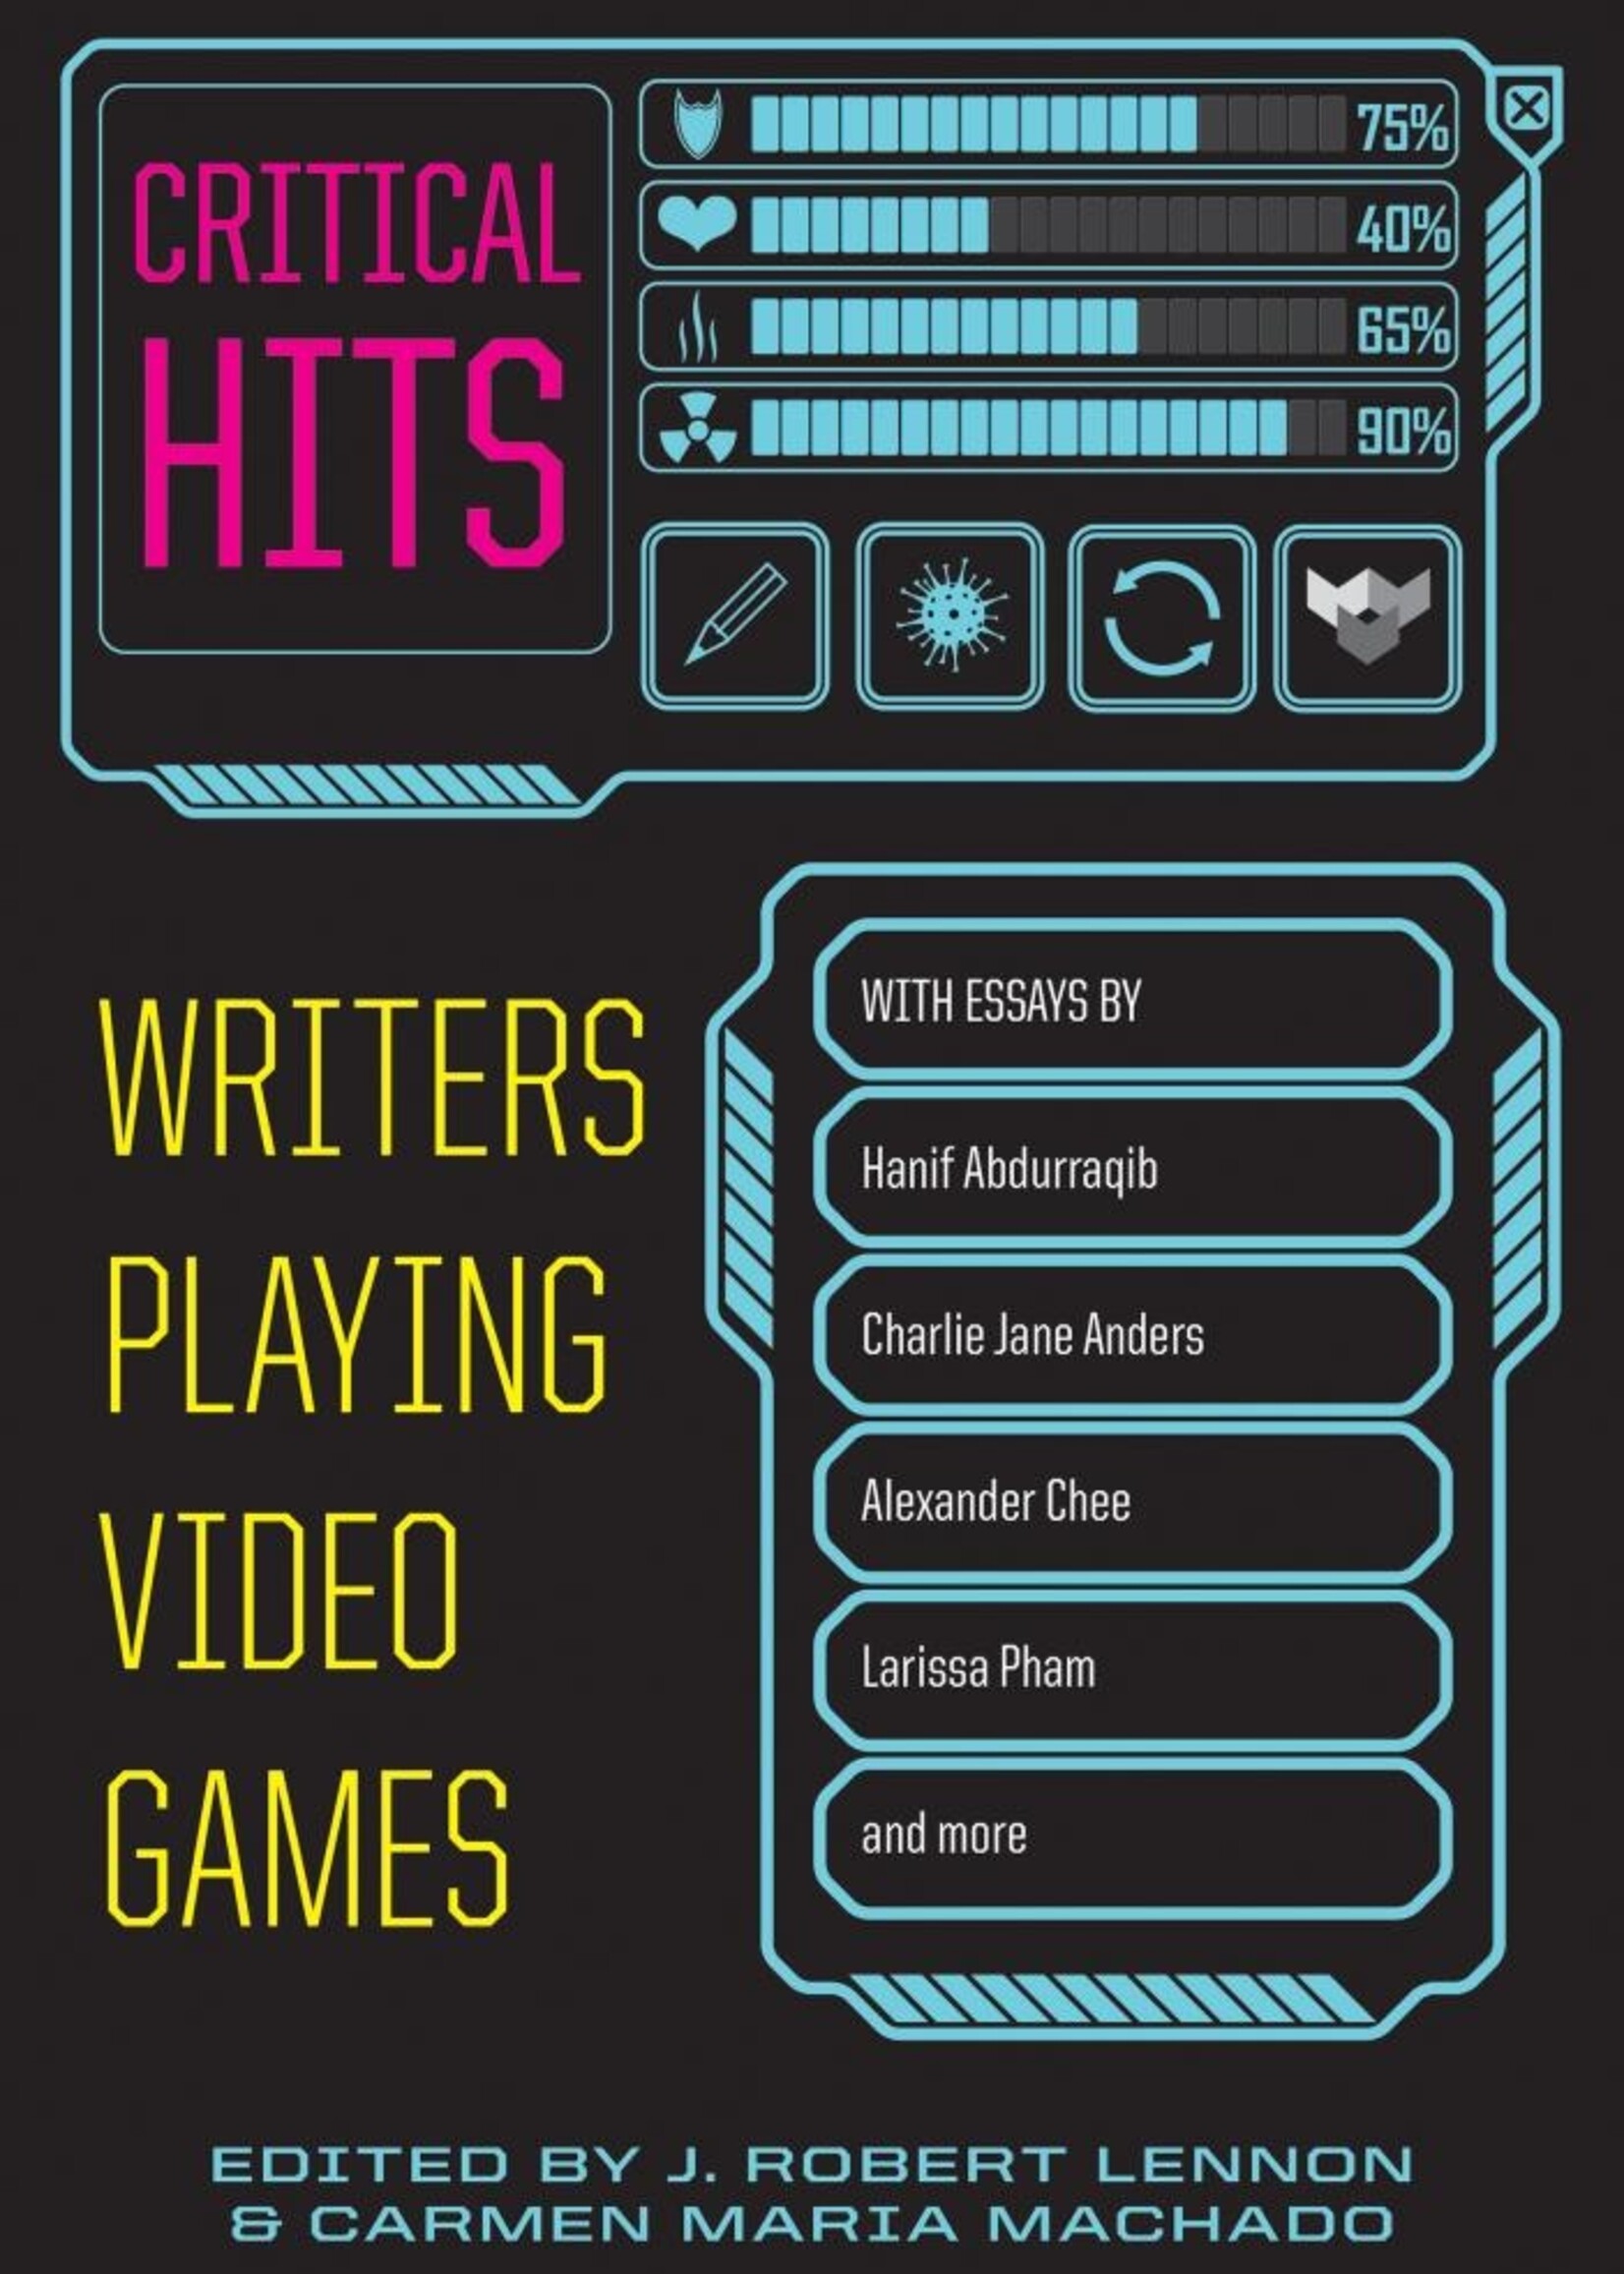 Critical Hits: Writers Playing Video Games (N)